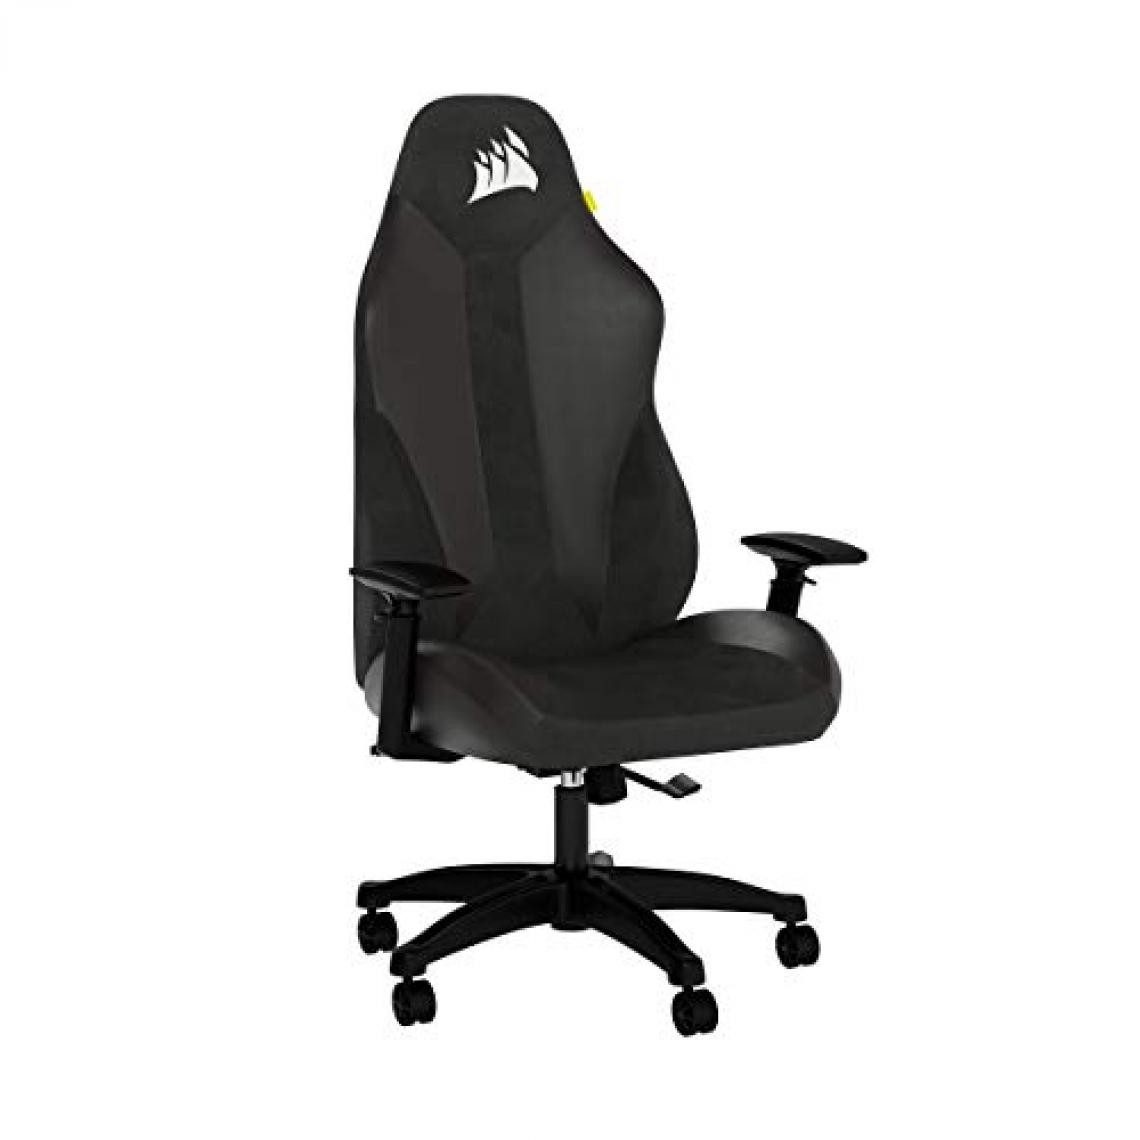 Corsair - FAUTEUIL GAMING TC70 FABRIC Relaxed Fit Noir*CF-9010042-WW*0777 - Chaise gamer